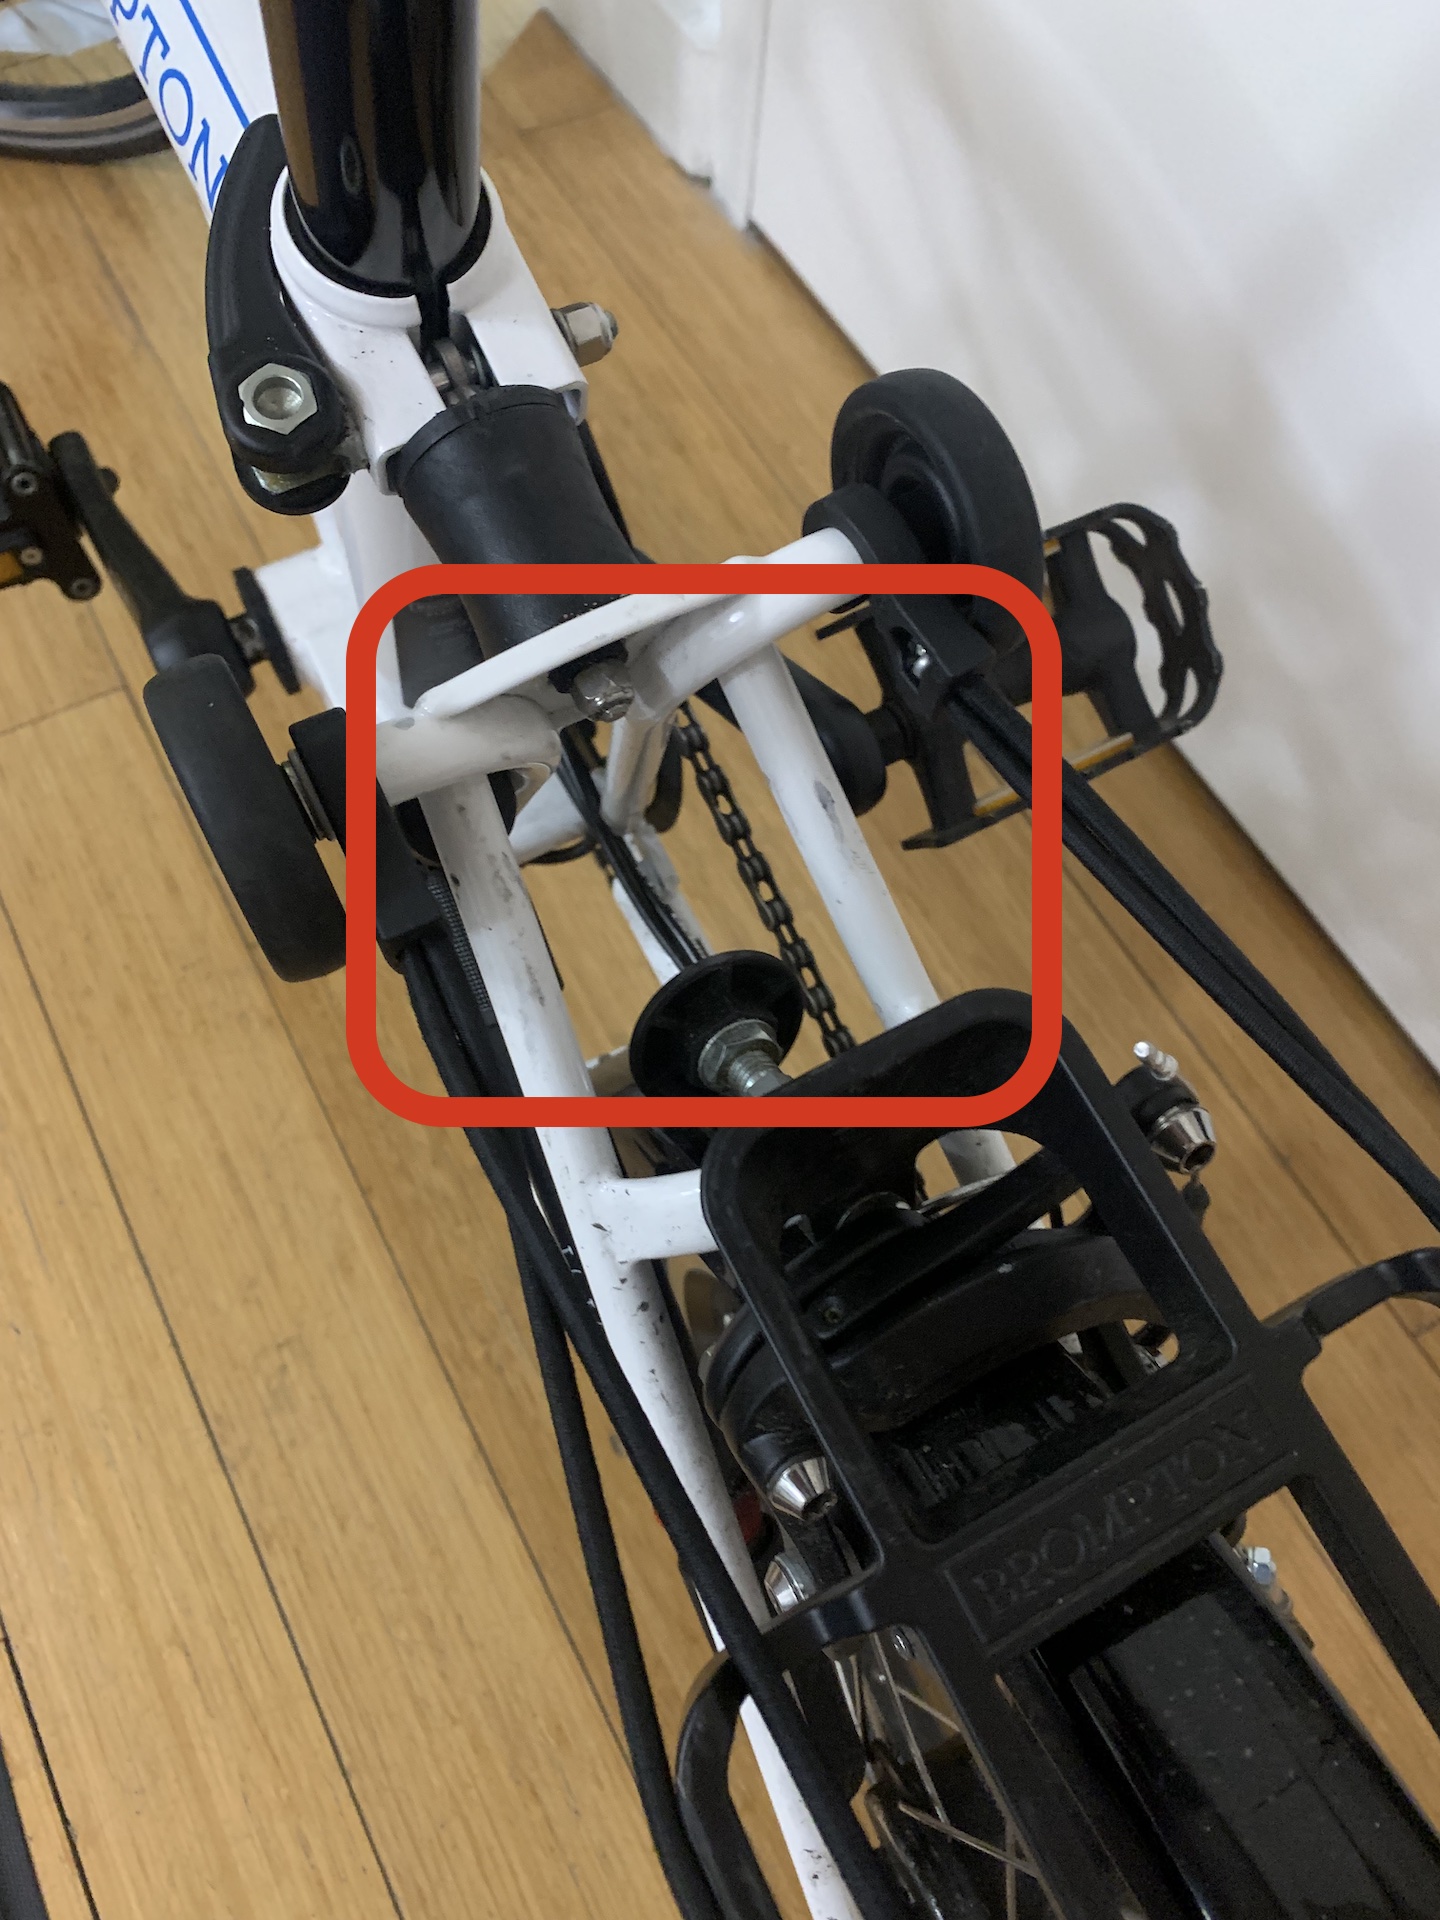 A close-up of the area of a Brompton folding bike, highlighting a gap between the shock absorber and the fender that a beach umbrella fits into